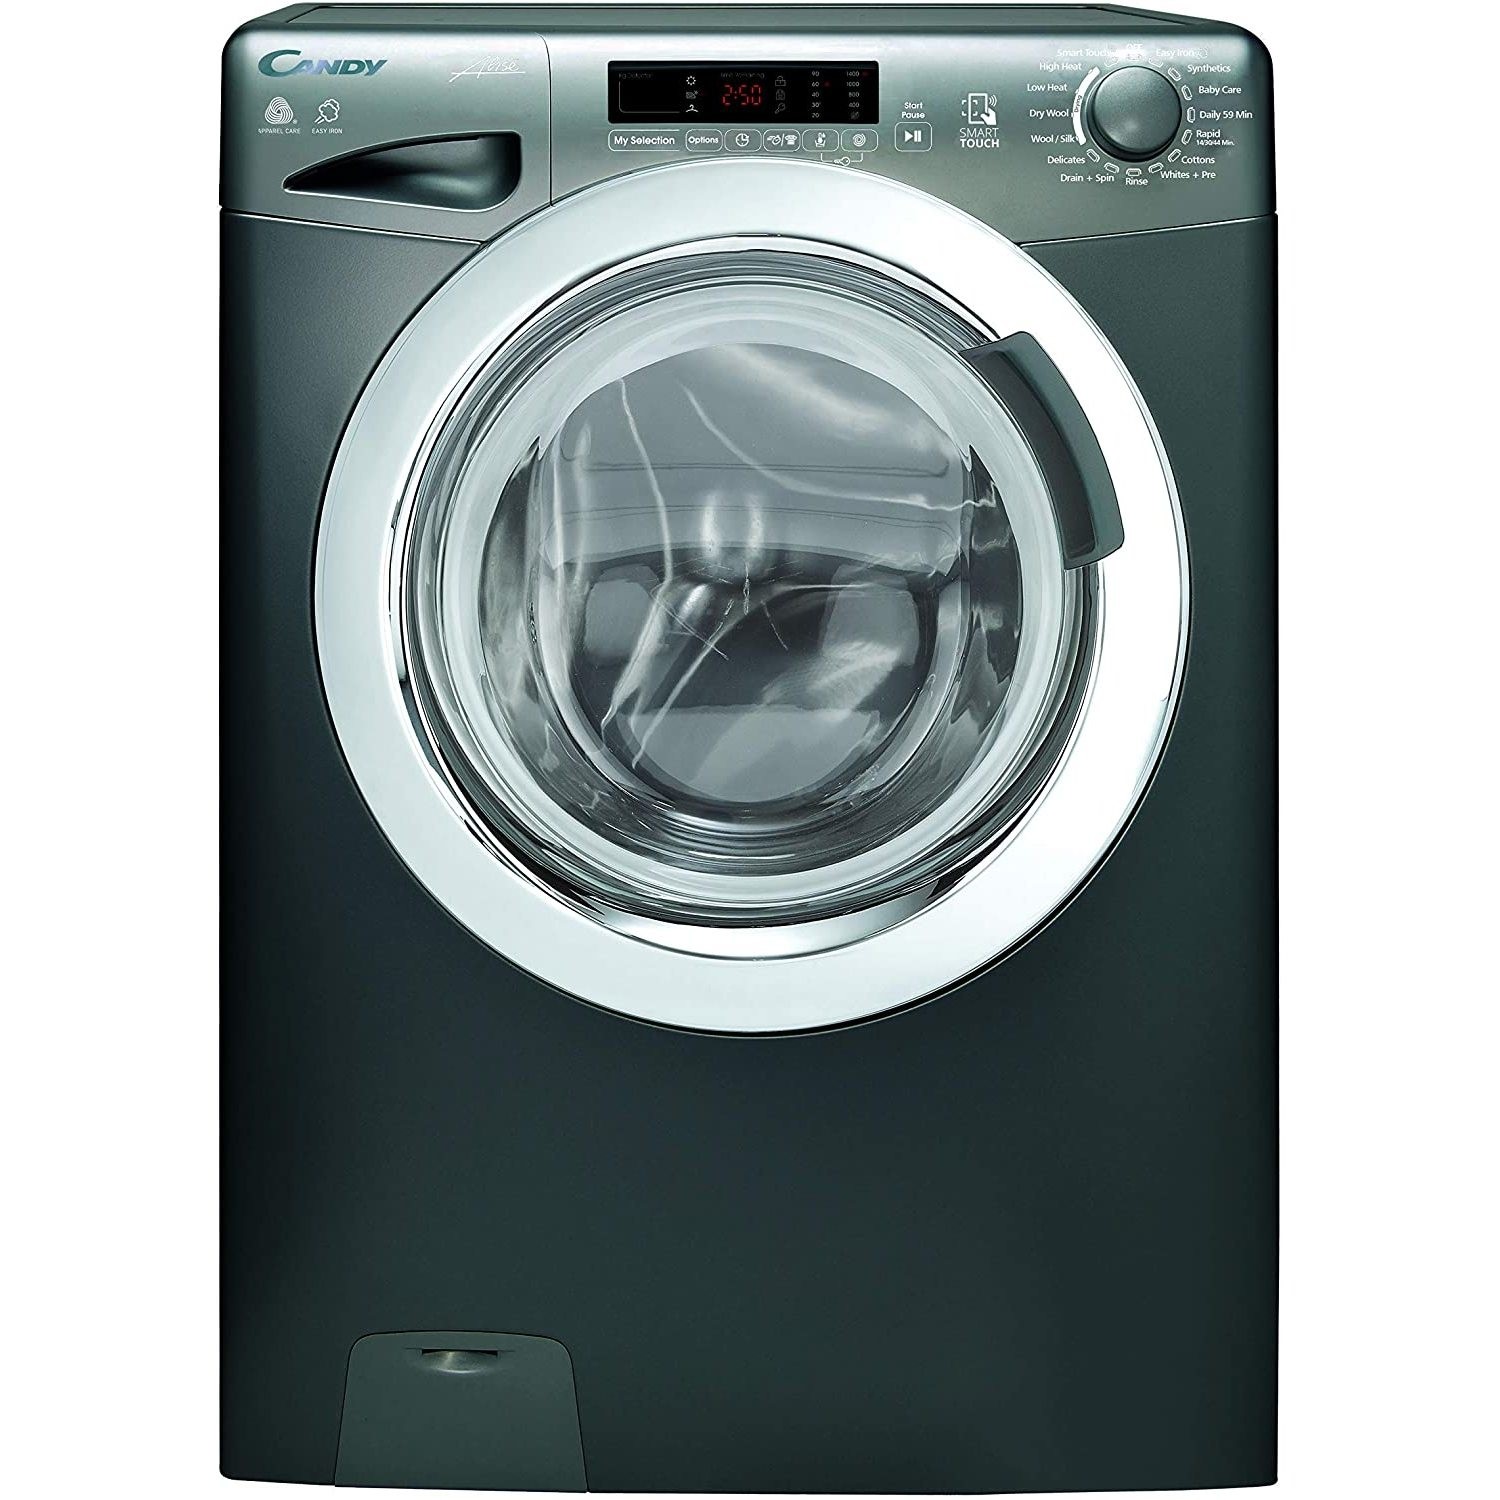 Candy GVSW485DCR 8KG / 5KG 1400 Spin Washer Dryer - Graphite